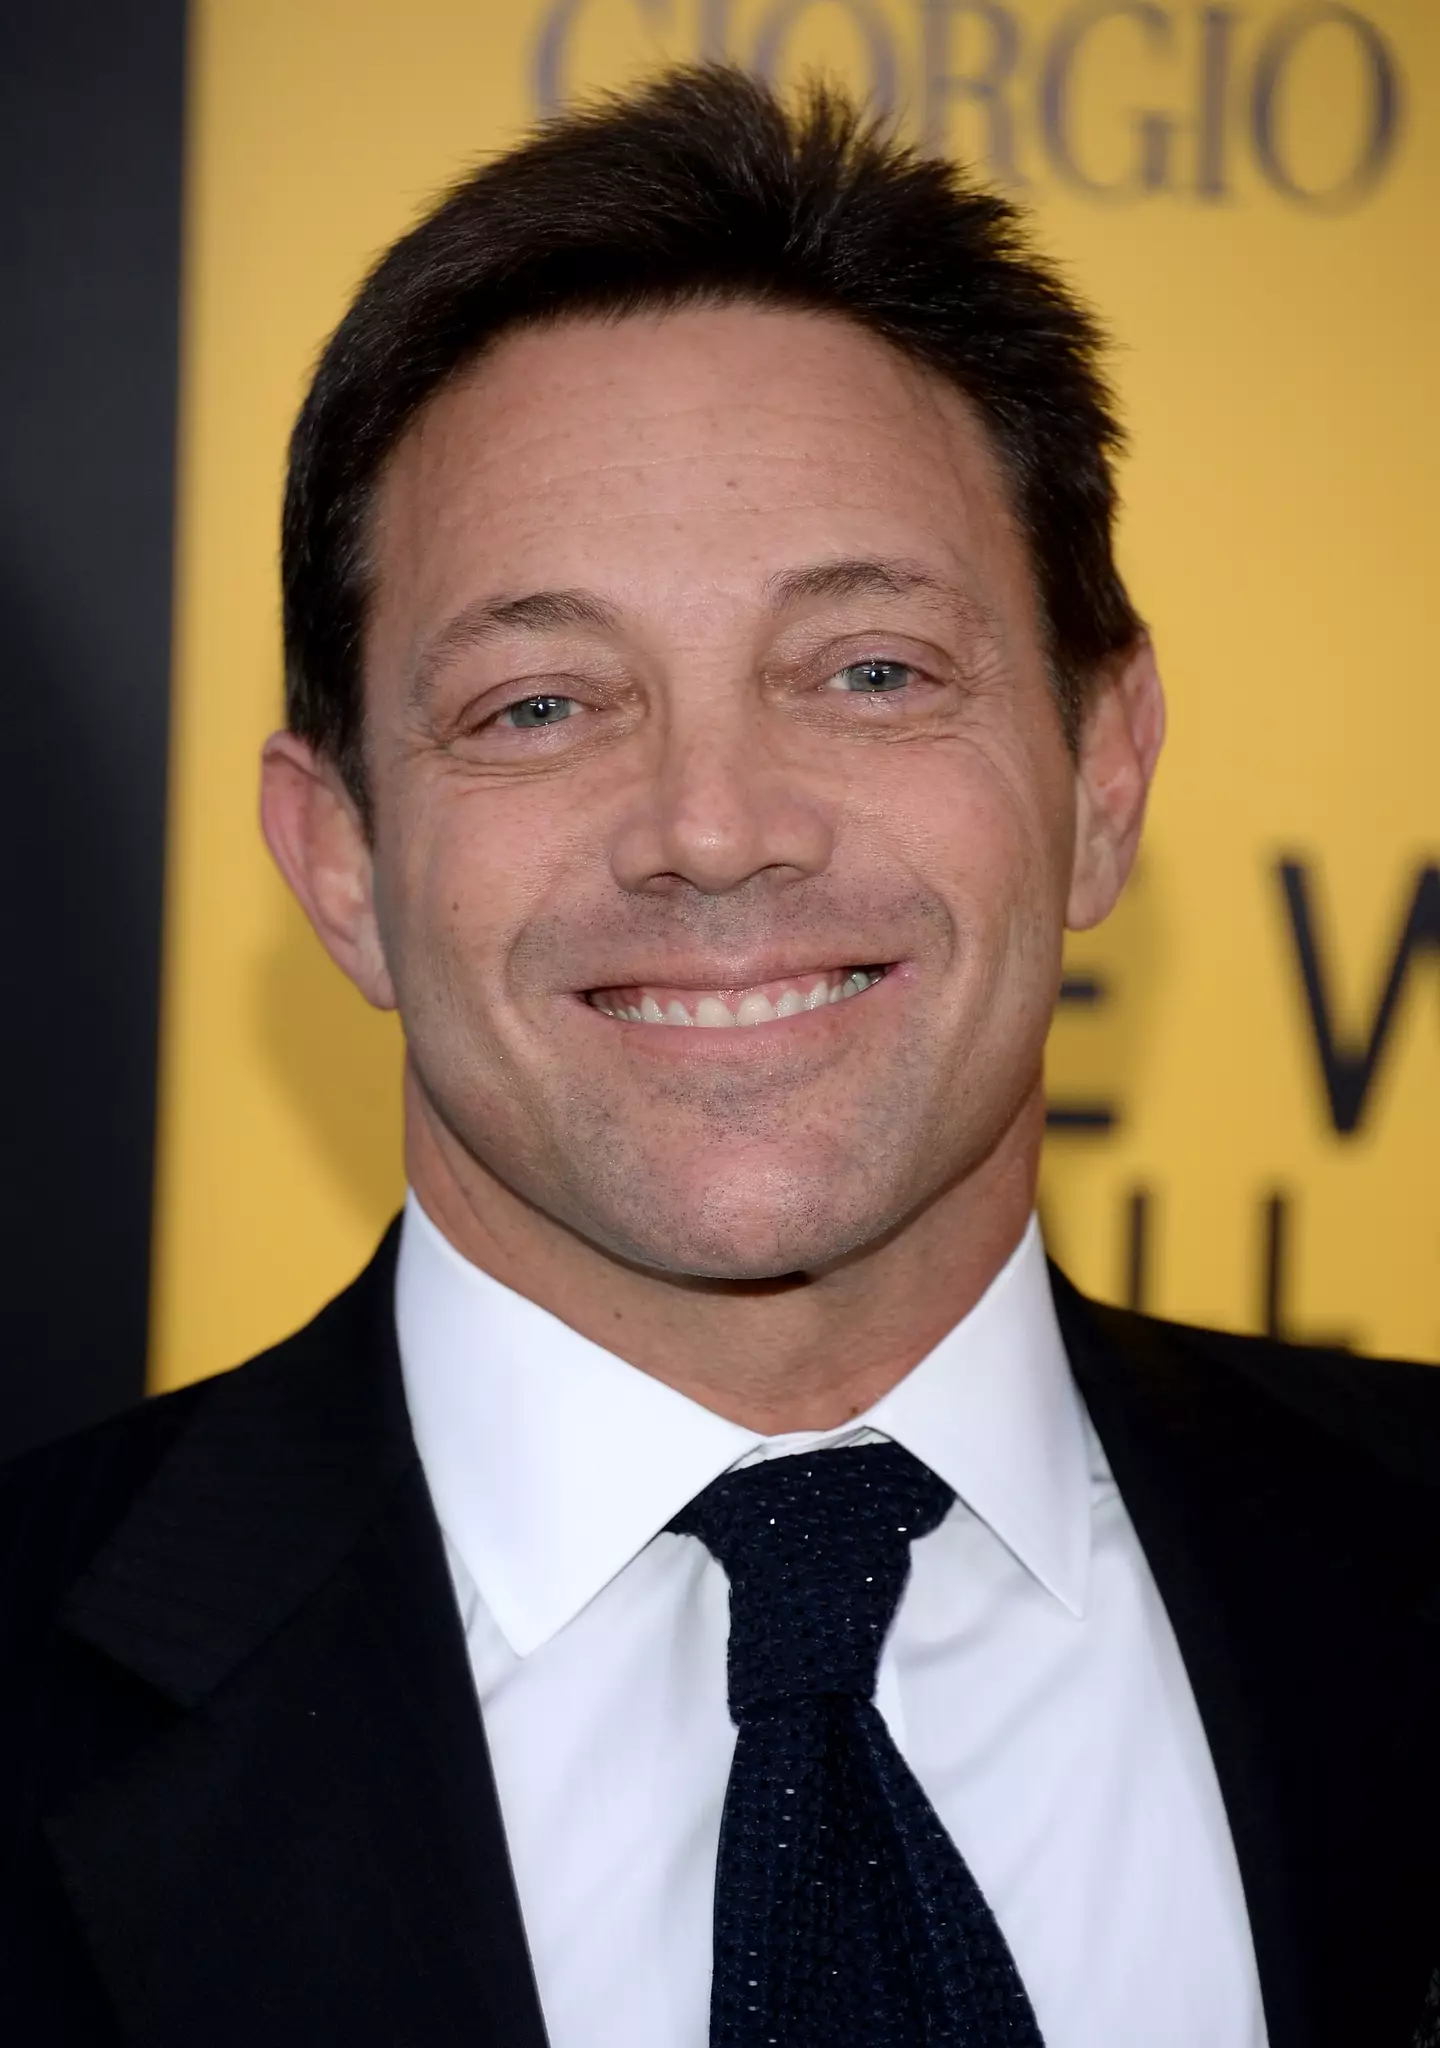 In 2020 the actual Jordan Belfort tried to sue the company that funded The Wolf of Wall Street.